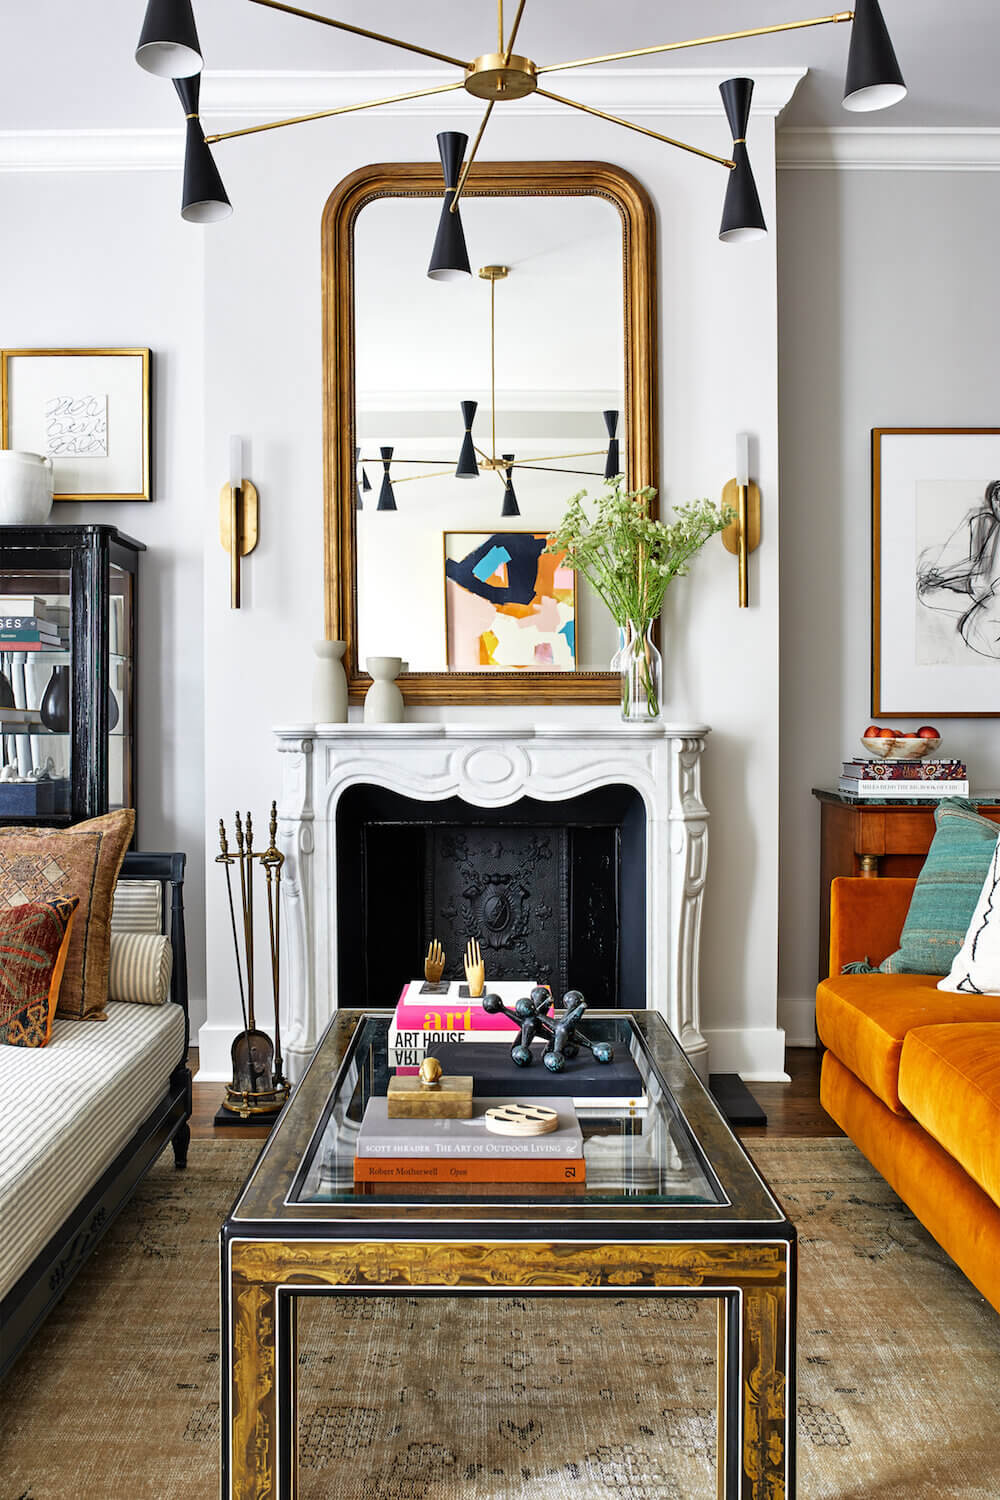 AnEclecticTownhousewithColorTouches TheNordroom3 An Eclectic Washington Townhouse with Colorful Touches